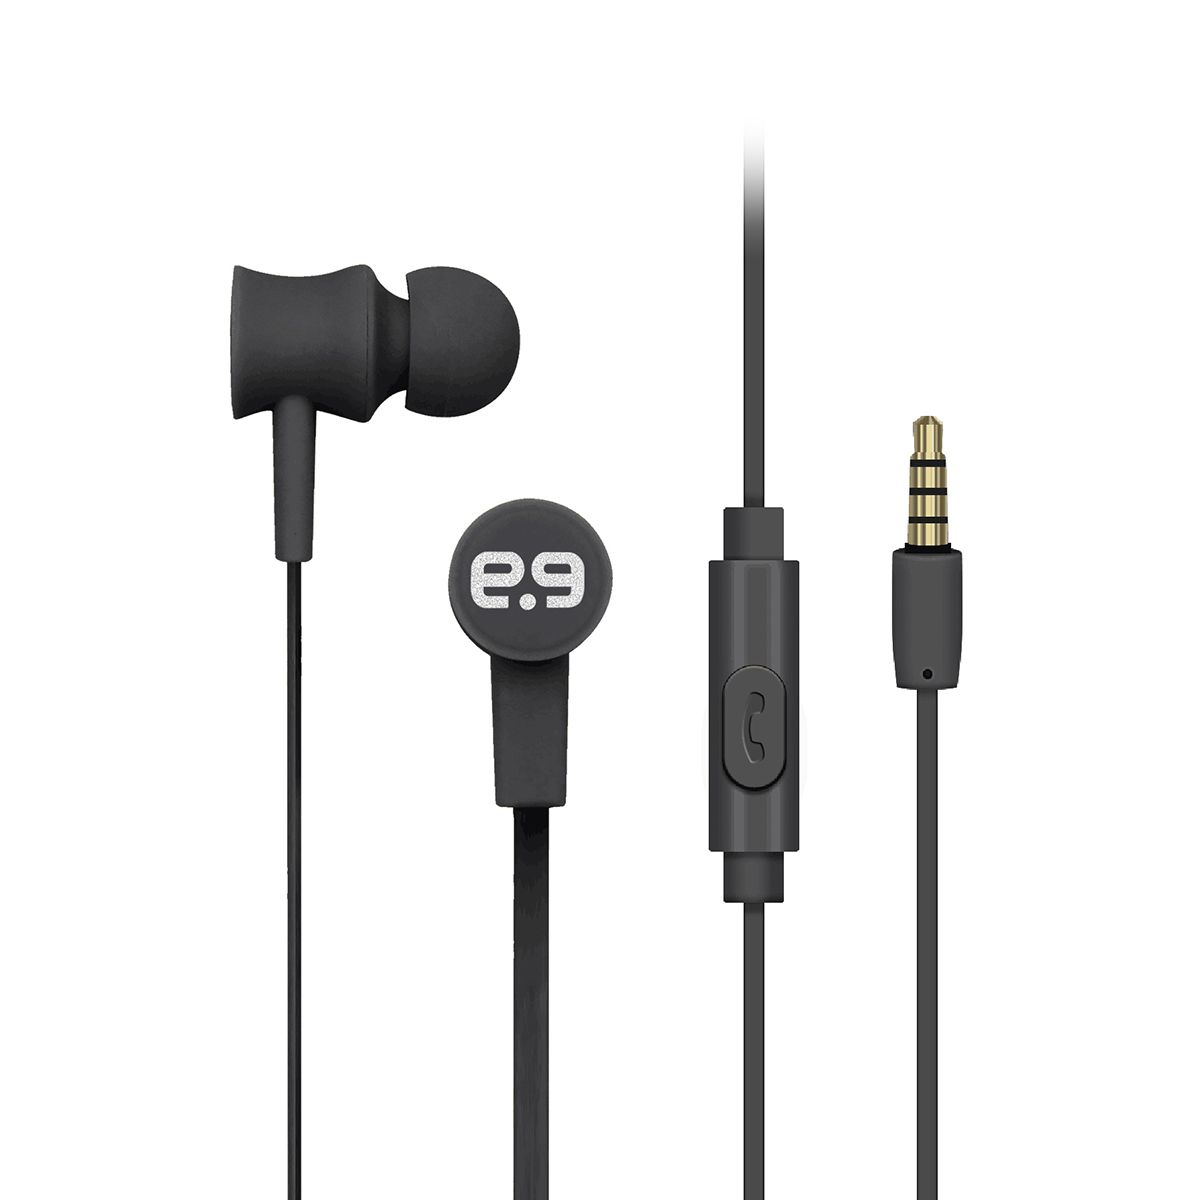 PureBoom Aux Corded EarBuds for Great Quality Sound - 3 Colors